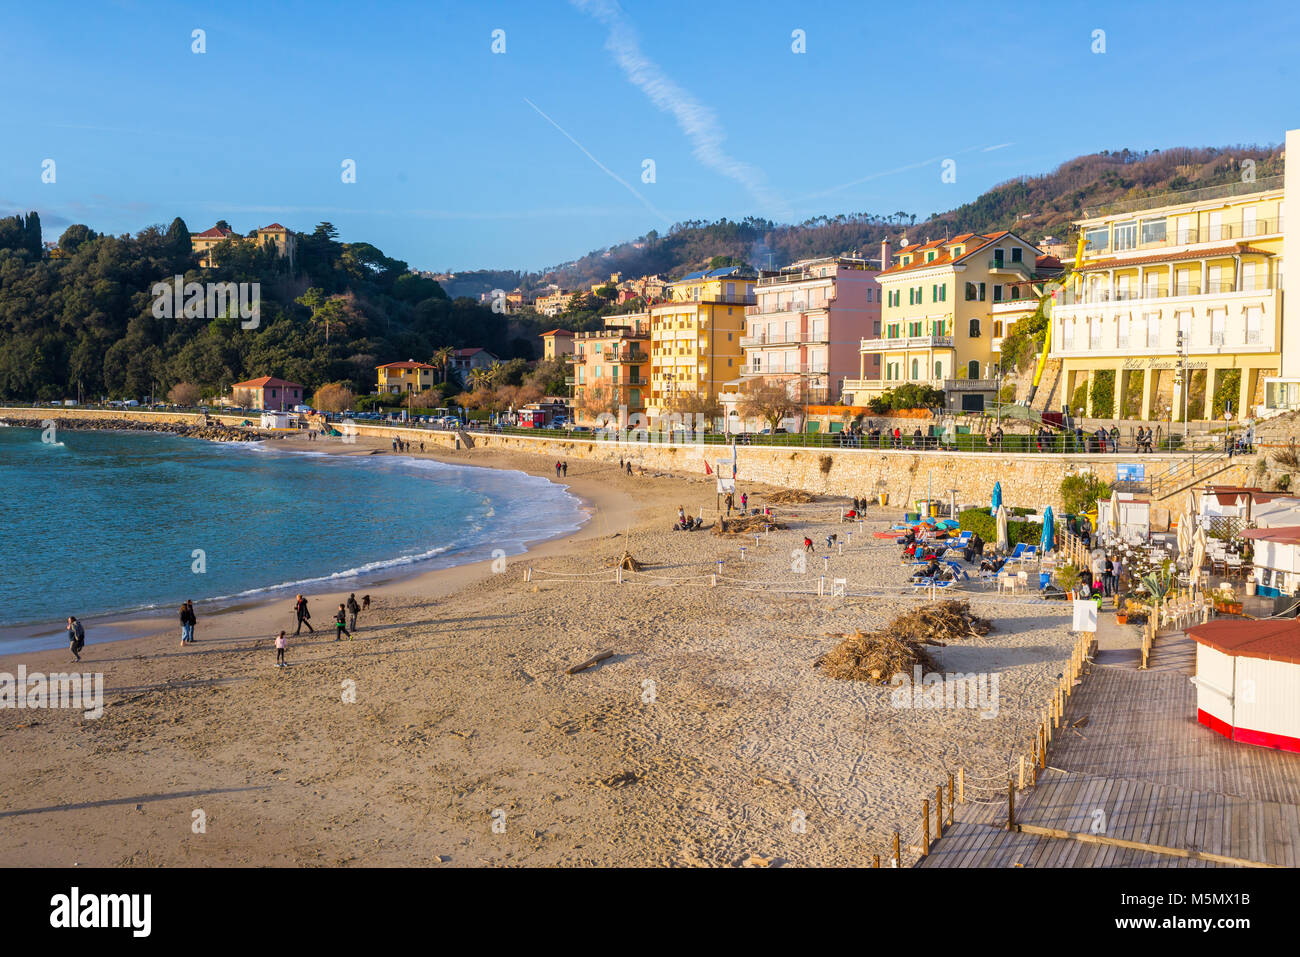 Beach view of the famous sea resort tourist town of Lerici, Cinque terre, Liguria, Italy Stock Photo